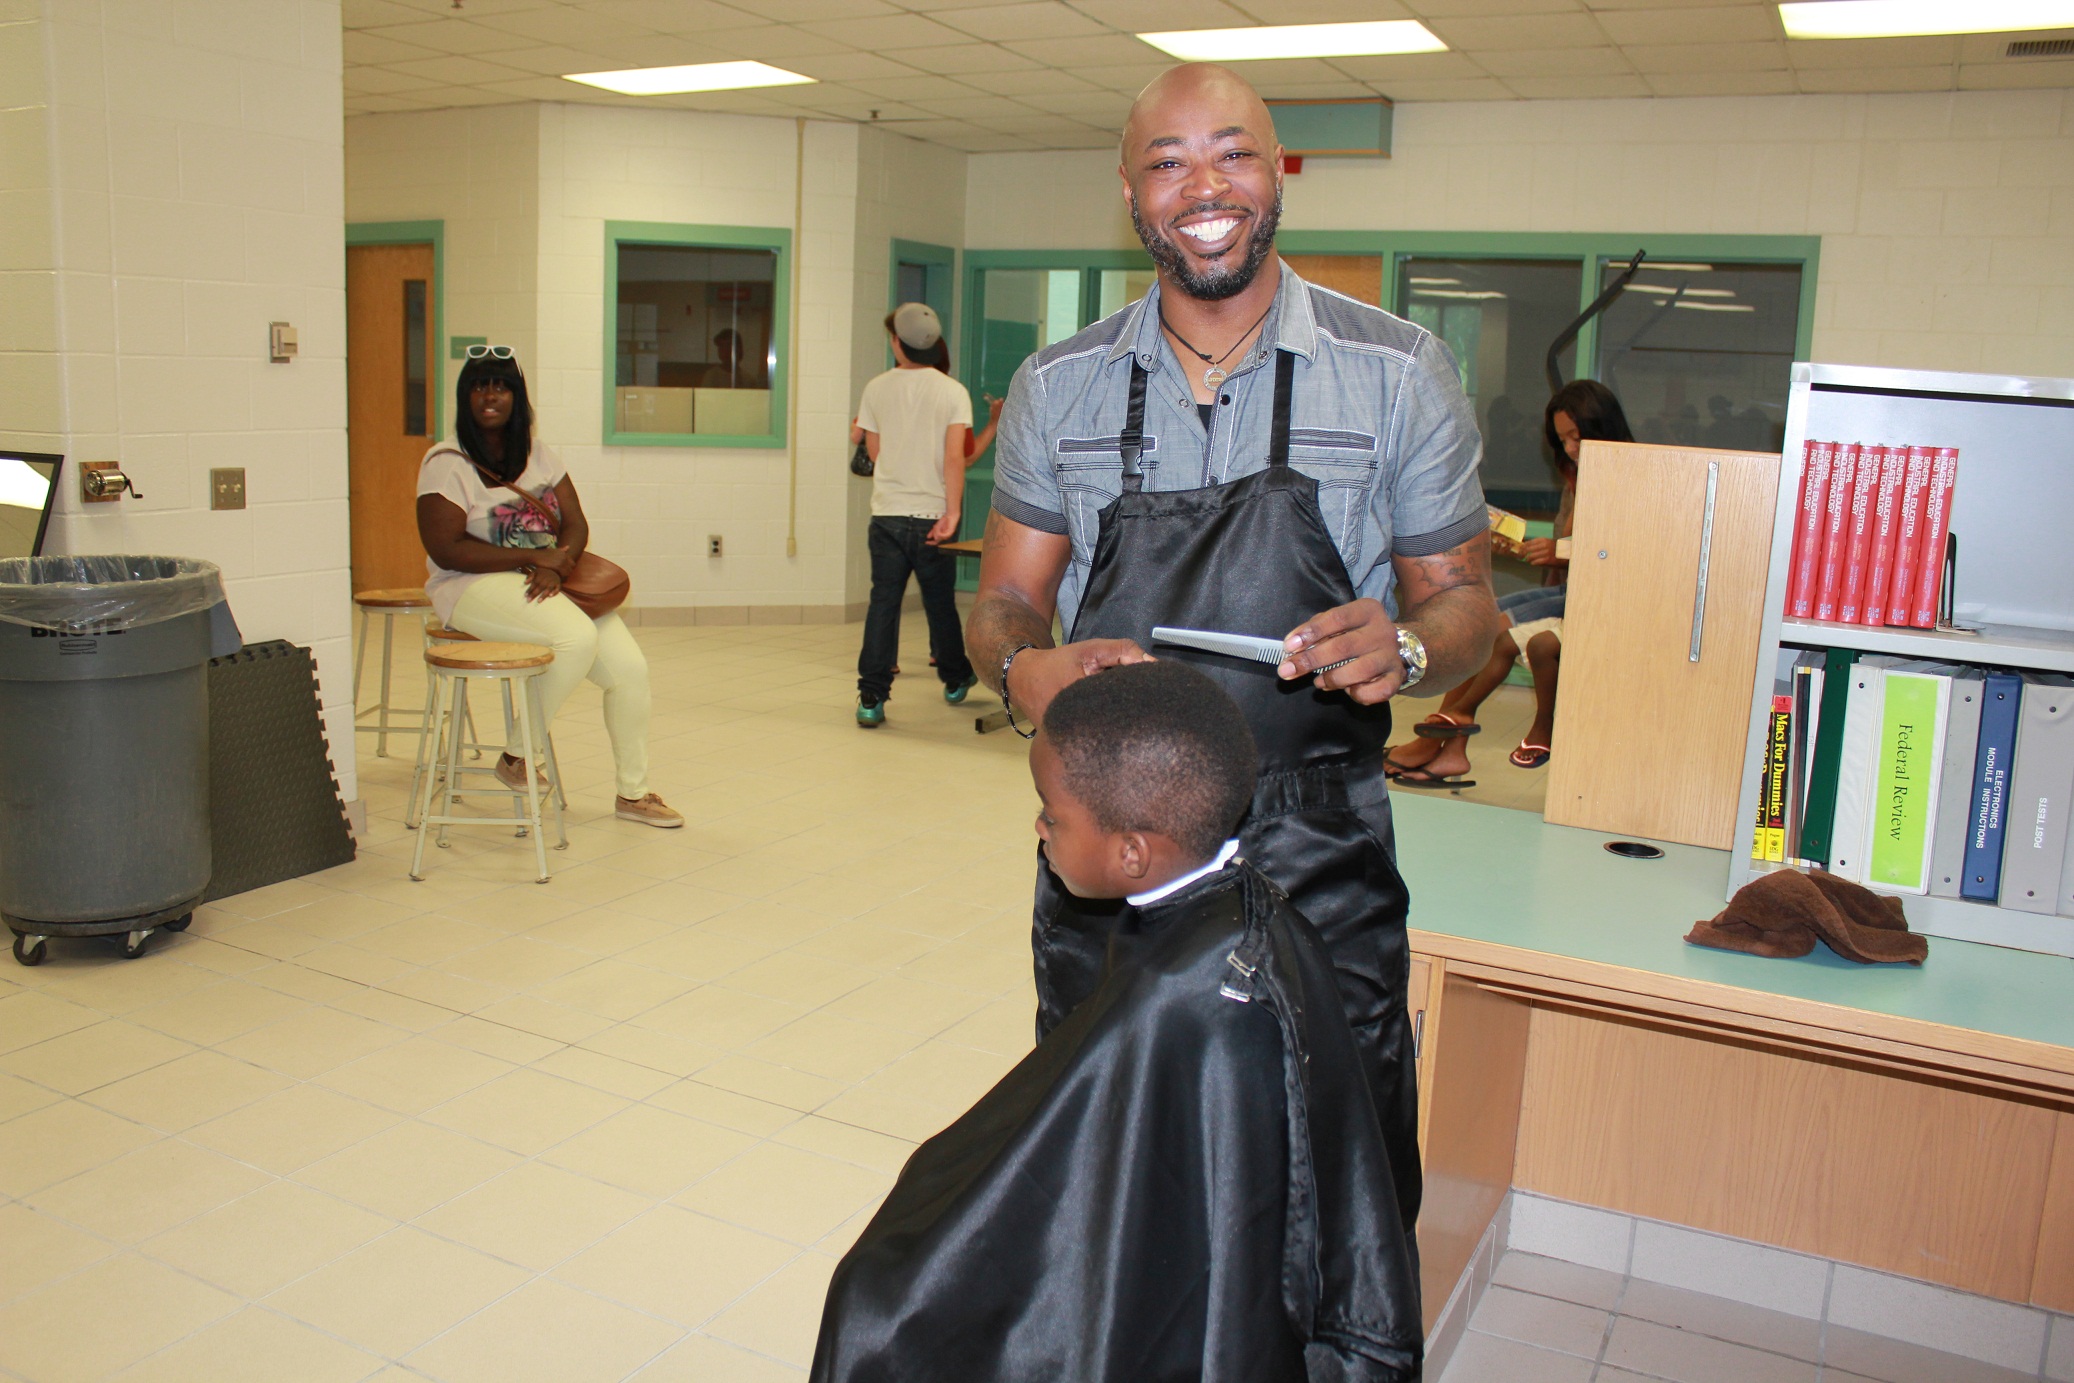 Lefenton “Kenny” Ellis from Lefenton’s Barber Shop in Virginia Beach returned as a volunteer again this year not only because he had a great time last year, but he wanted to help to make sure students had the “edge” when they walk through the front door of the schools on that special first day. It’s appears that kindergartner Kieran L. can’t wait for school to start. “I want to play with my friends and I want to learn to read,” he said as he held up a new book he was just given from the Yardigans Series.